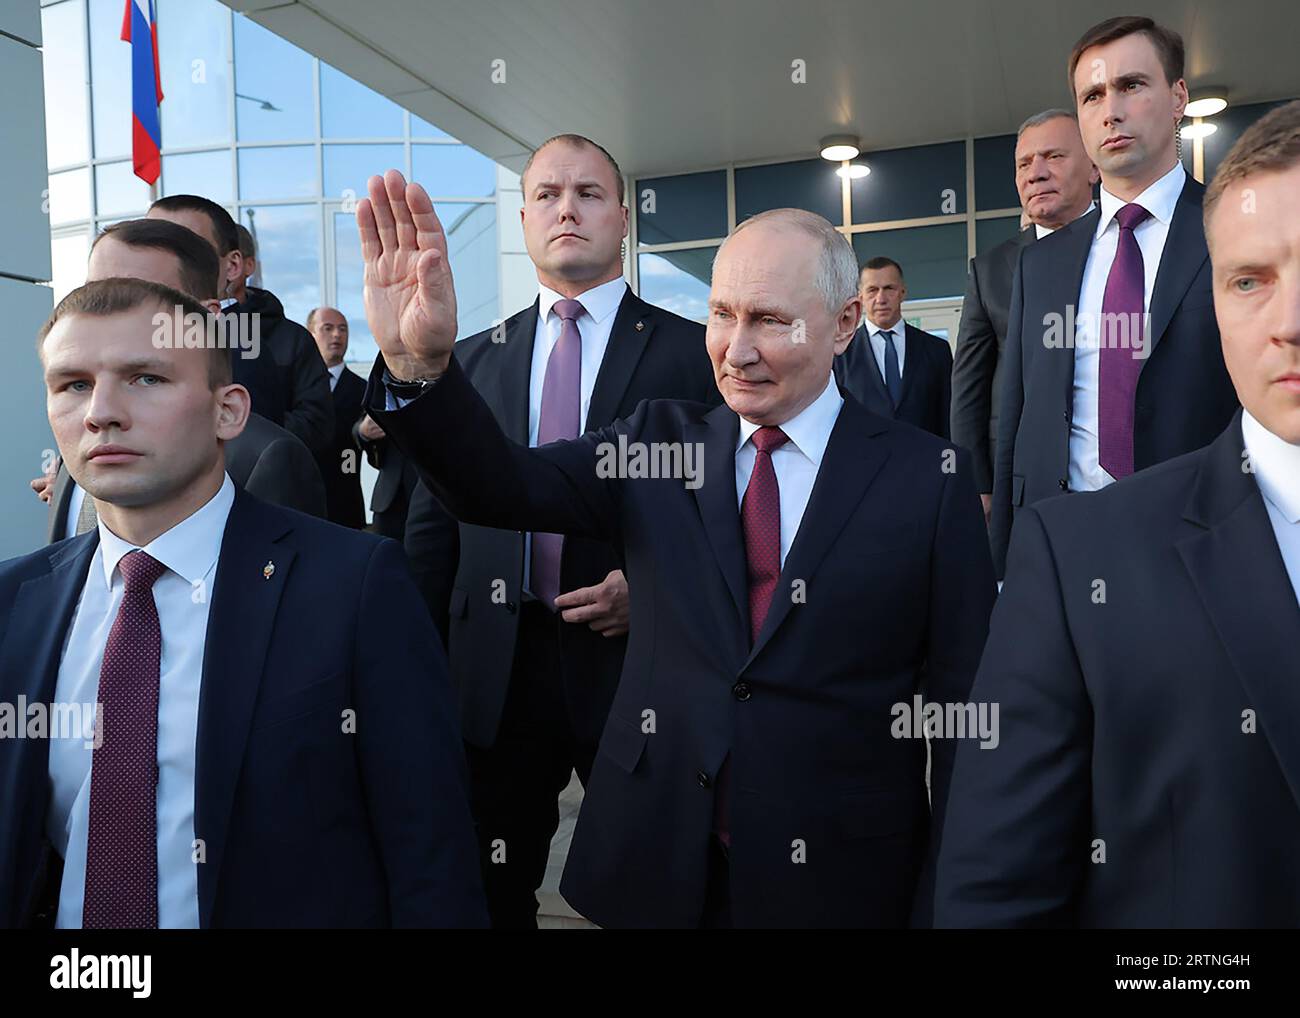 A photo provided by the North Korean government on september 14, shows that, Russian President Vladimir Putin (C) bids farewell to North Korean leader Kim Jong Un, (not seen), as he departs from the Vostochny cosmodrome in Amur region, Russia on Wednesday, September 13, 2023. North Korean state news agency KCNA said on Thursday that, Russian President Vladimir Putin has accepted an invitation from North Korean leader Kim Jong Un to visit Pyongyang at Putin's 'convenient time'. The two leaders met in Russia's Far East on Wednesday for their first face-to-face summit in four years. During the su Stock Photo